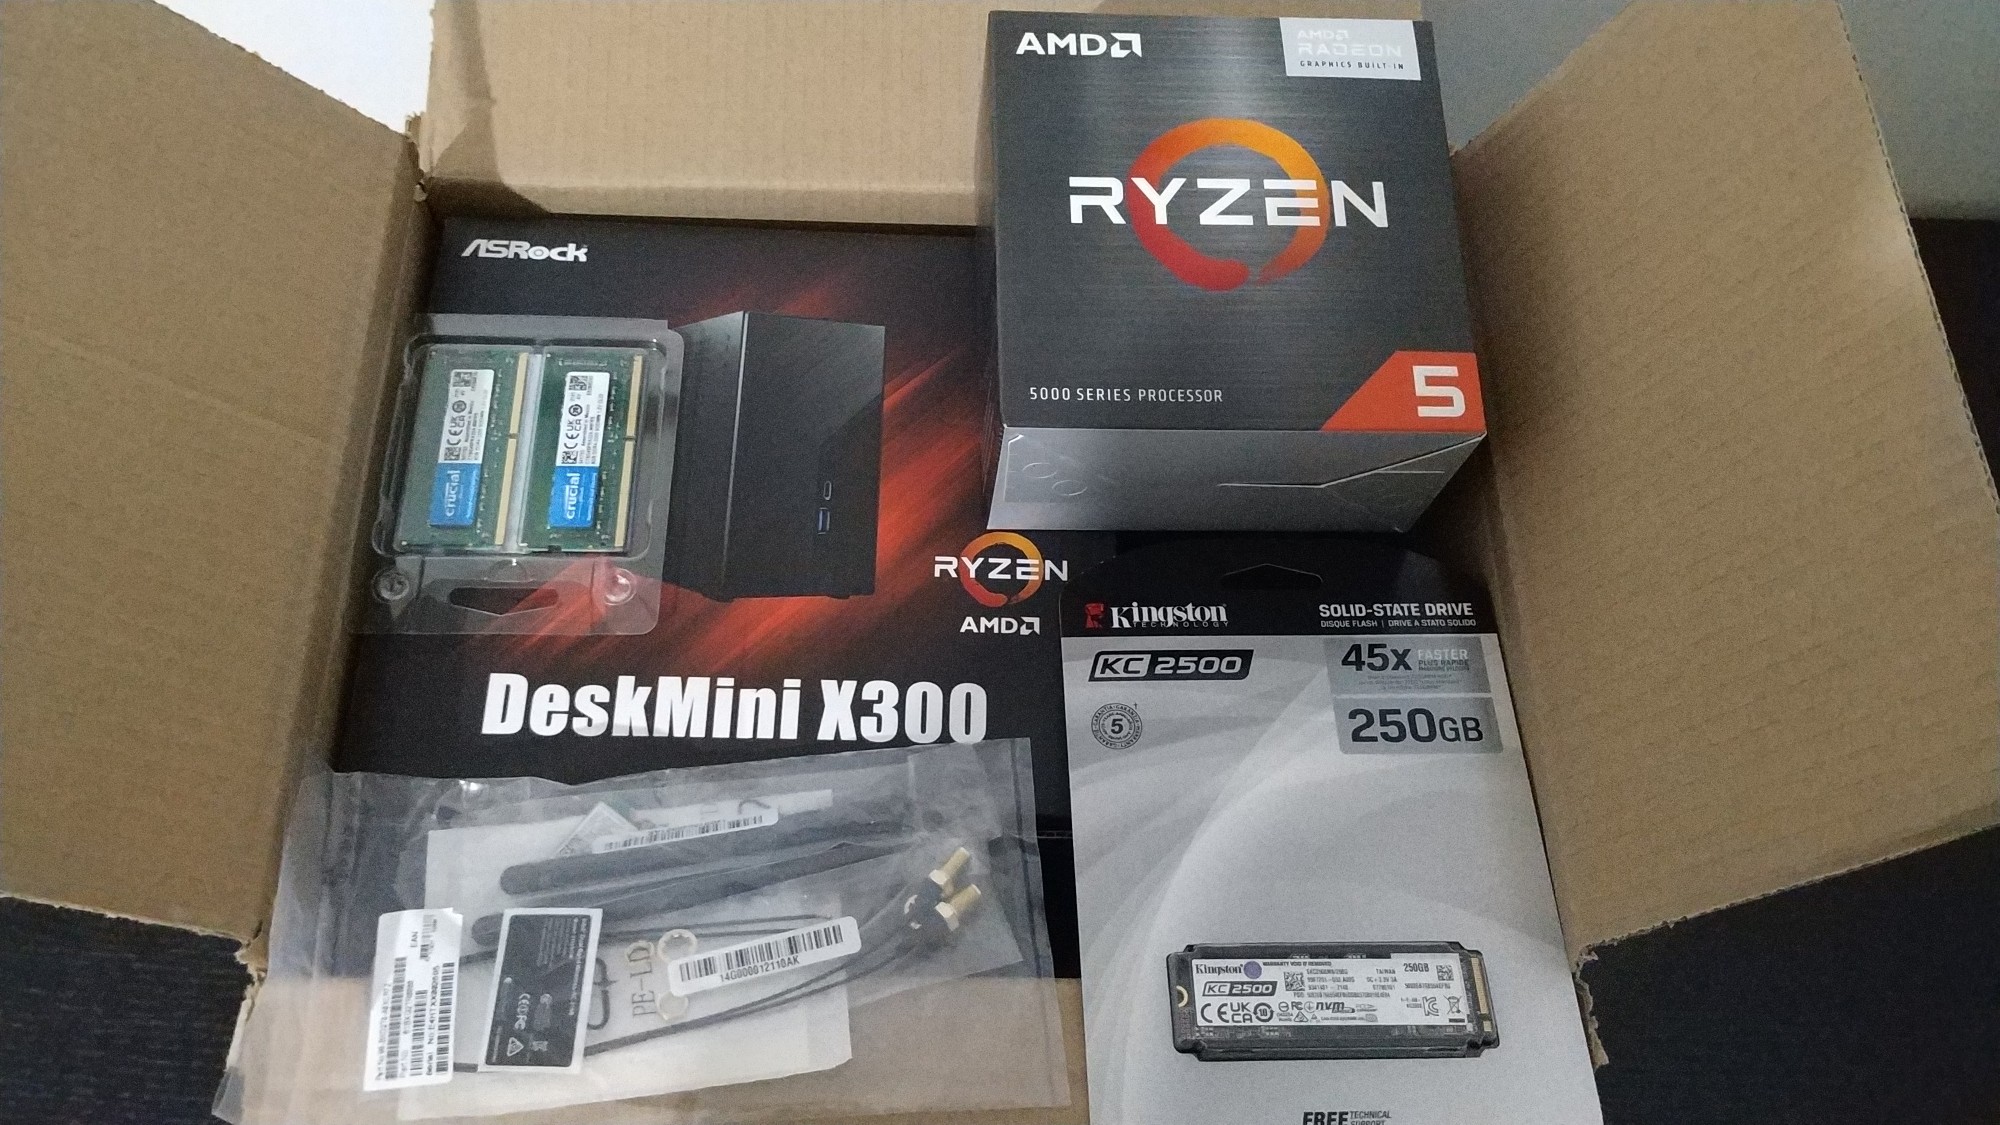 Unboxing and mounting the new machine (ASRock DeskMini X300